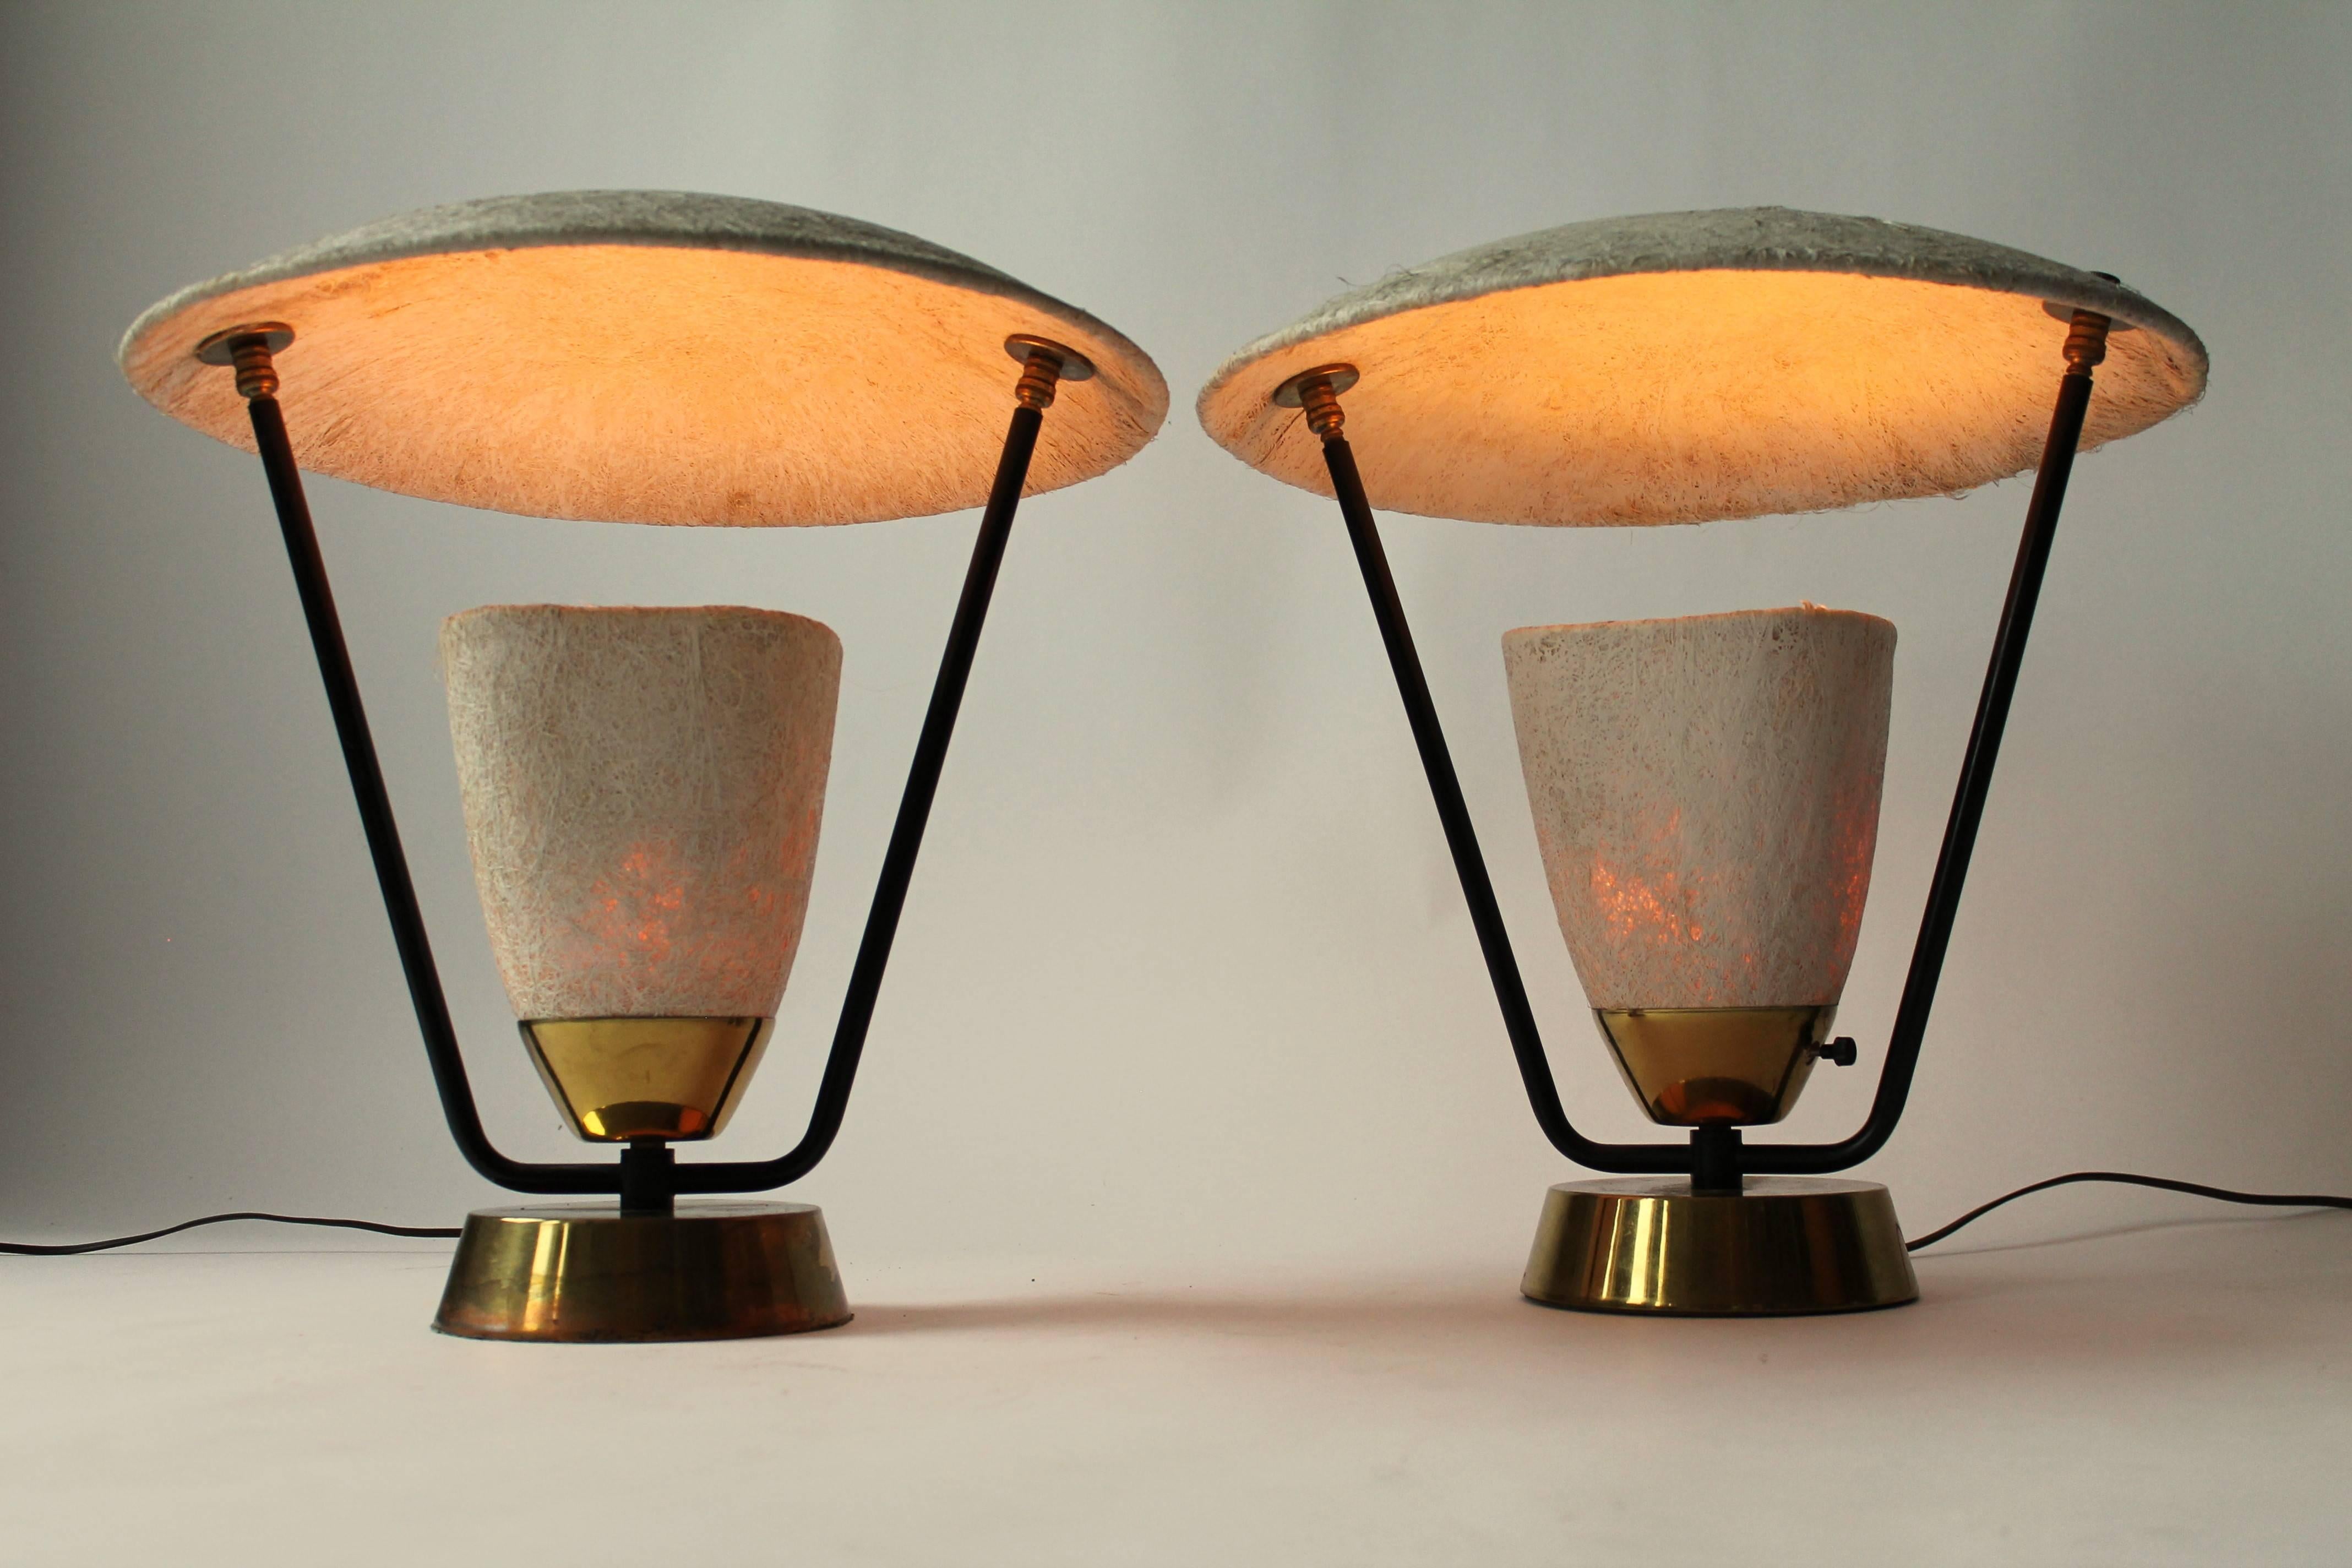 Pair of hand molded, pressed fiberglass shade and cone table lamp with brass base and hardware. Stem are enameled black steel.

The fiberglass is quite thick and opaque. They were made to have the light bounce on the dome producing a downward glow